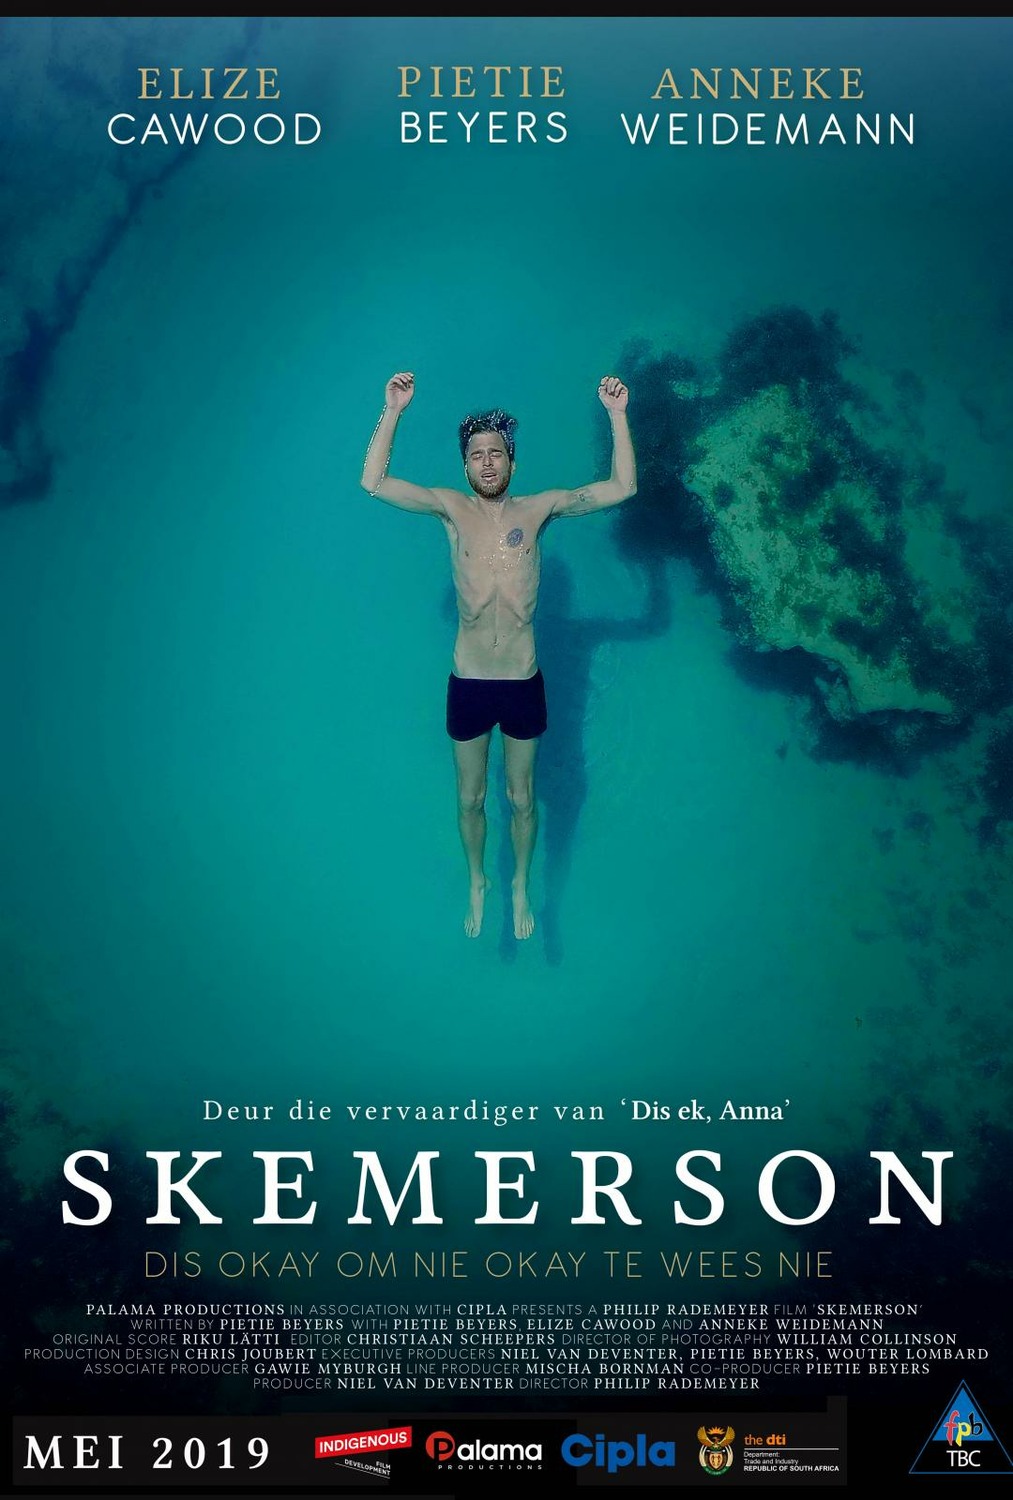 Extra Large Movie Poster Image for Skemerson 